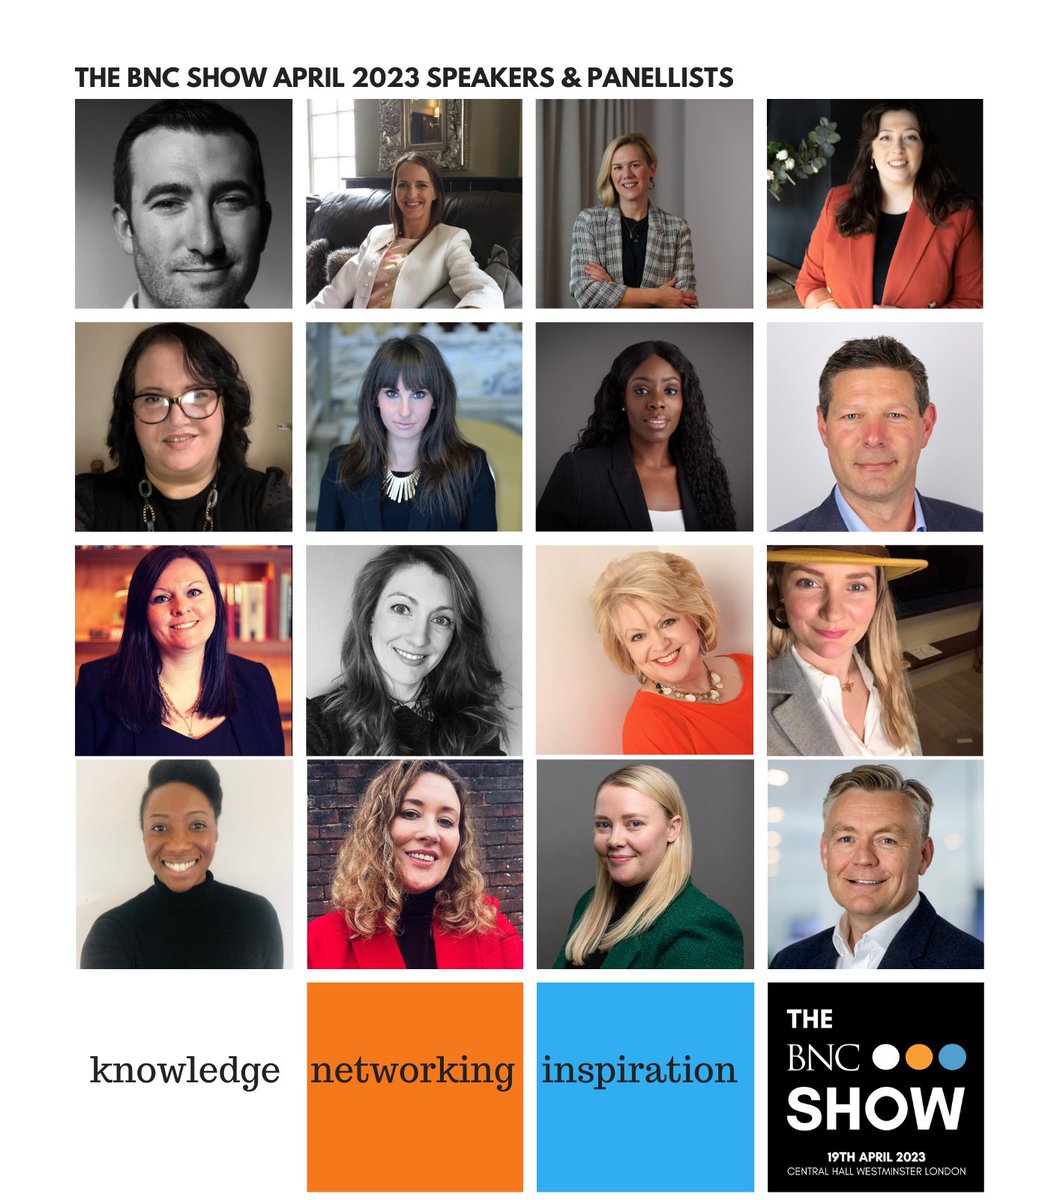 These amazing #eventprofs will be speaking on Wednesday at the #BNCShow! Join them & others throughout the day in the Robert Perks room. Come & be inspired and informed in massive equal measures. 19th April  |  9am-4pm  |  Central Hall Westminster  #theshoweventprofsrecommend